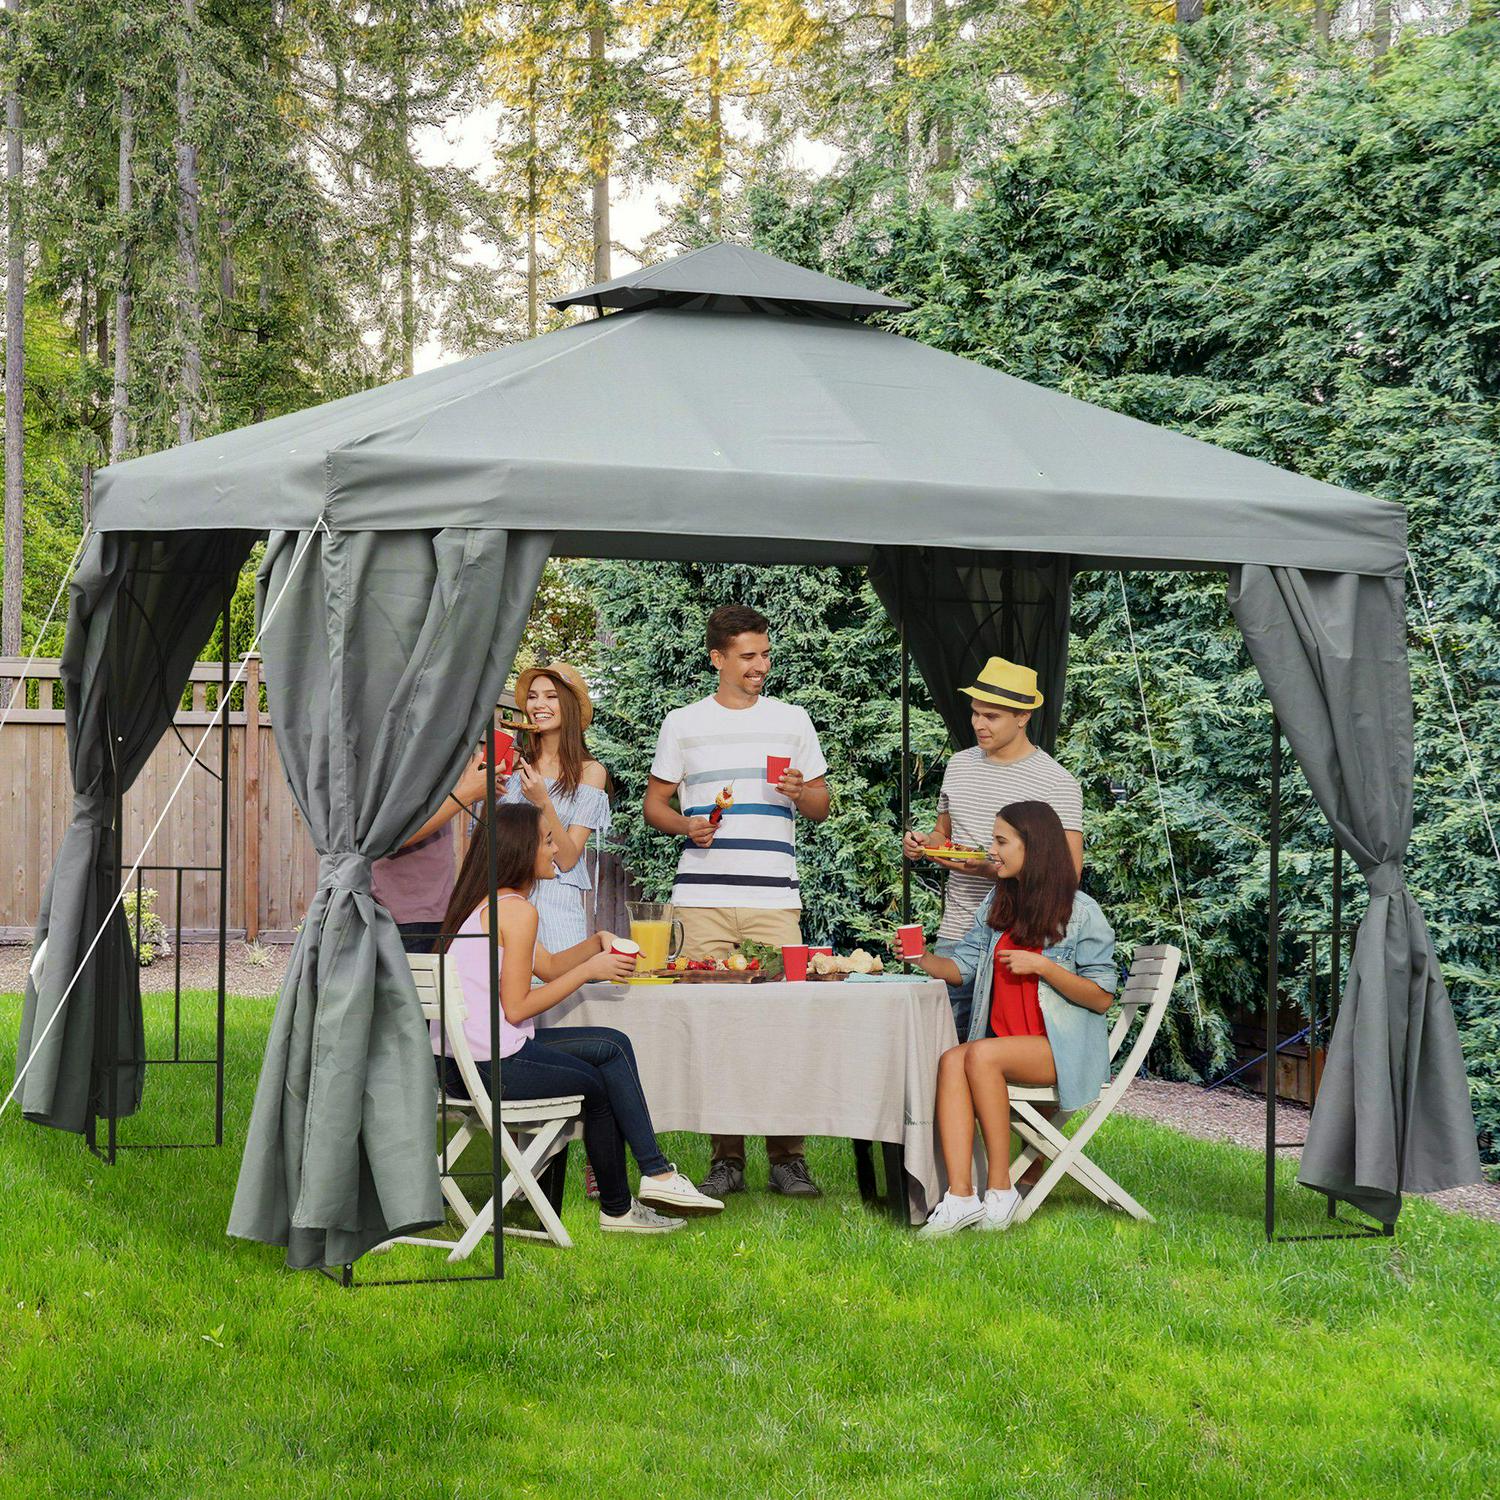 Metal Gazebo Garden Marquee Patio Tent Pavilion Canopy Shade Shelter